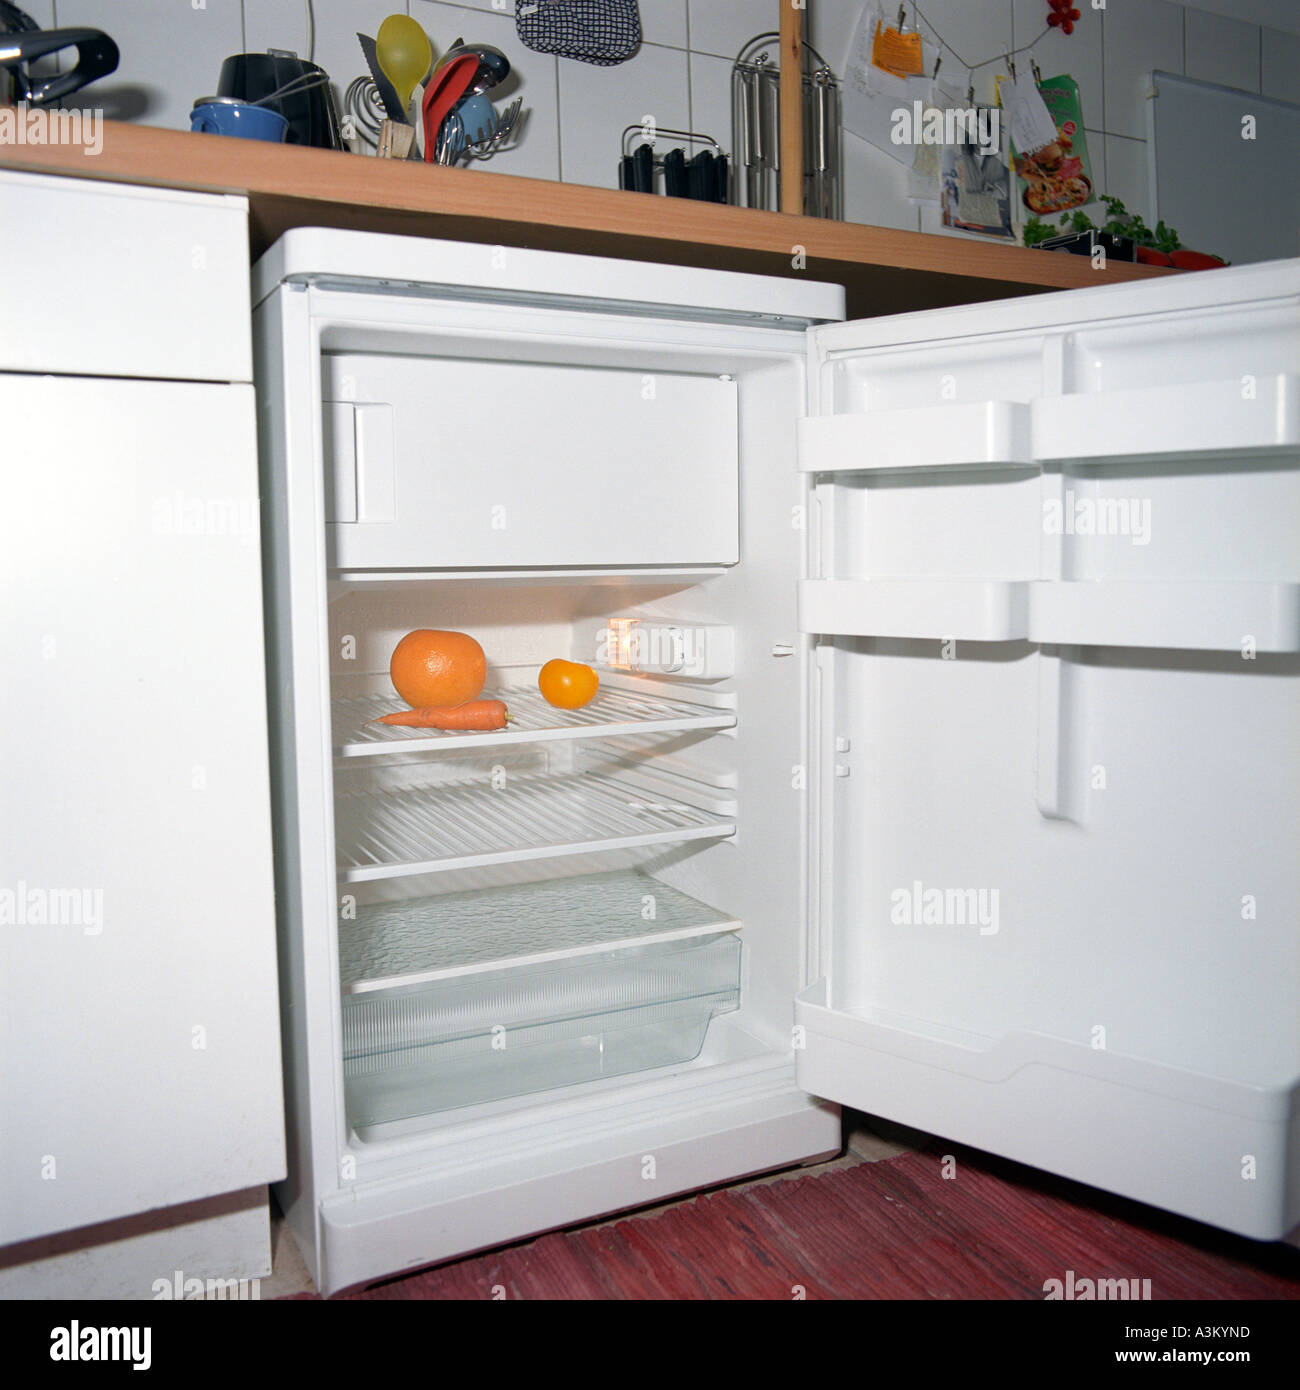 view into an empty fridge in kitchen containing only some orange fruit and vegetables Stock Photo